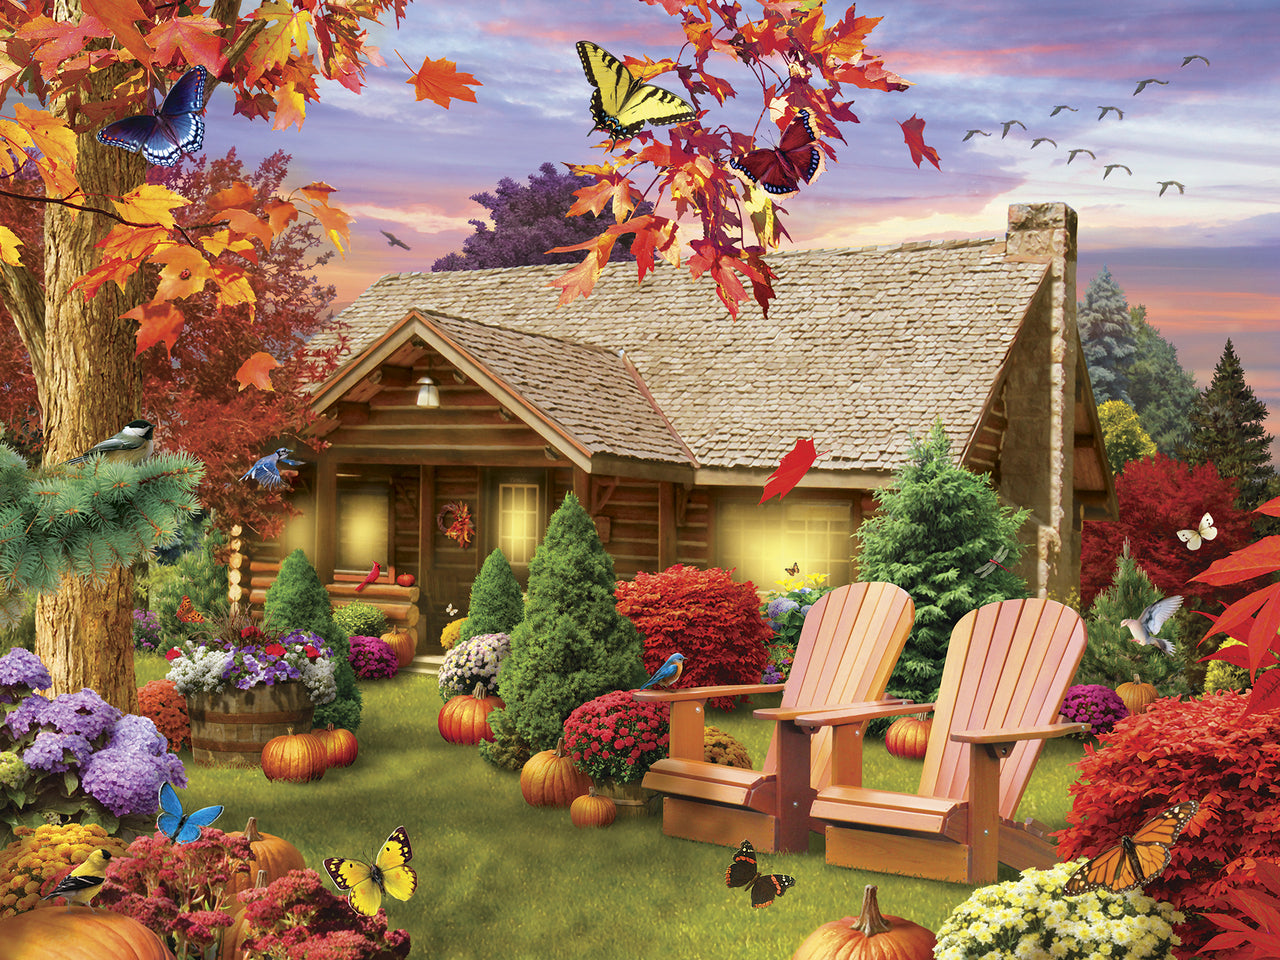 Memory Lane - Autumn Warmth - Large 300 Piece EZGrip Jigsaw Puzzle by Masterpieces